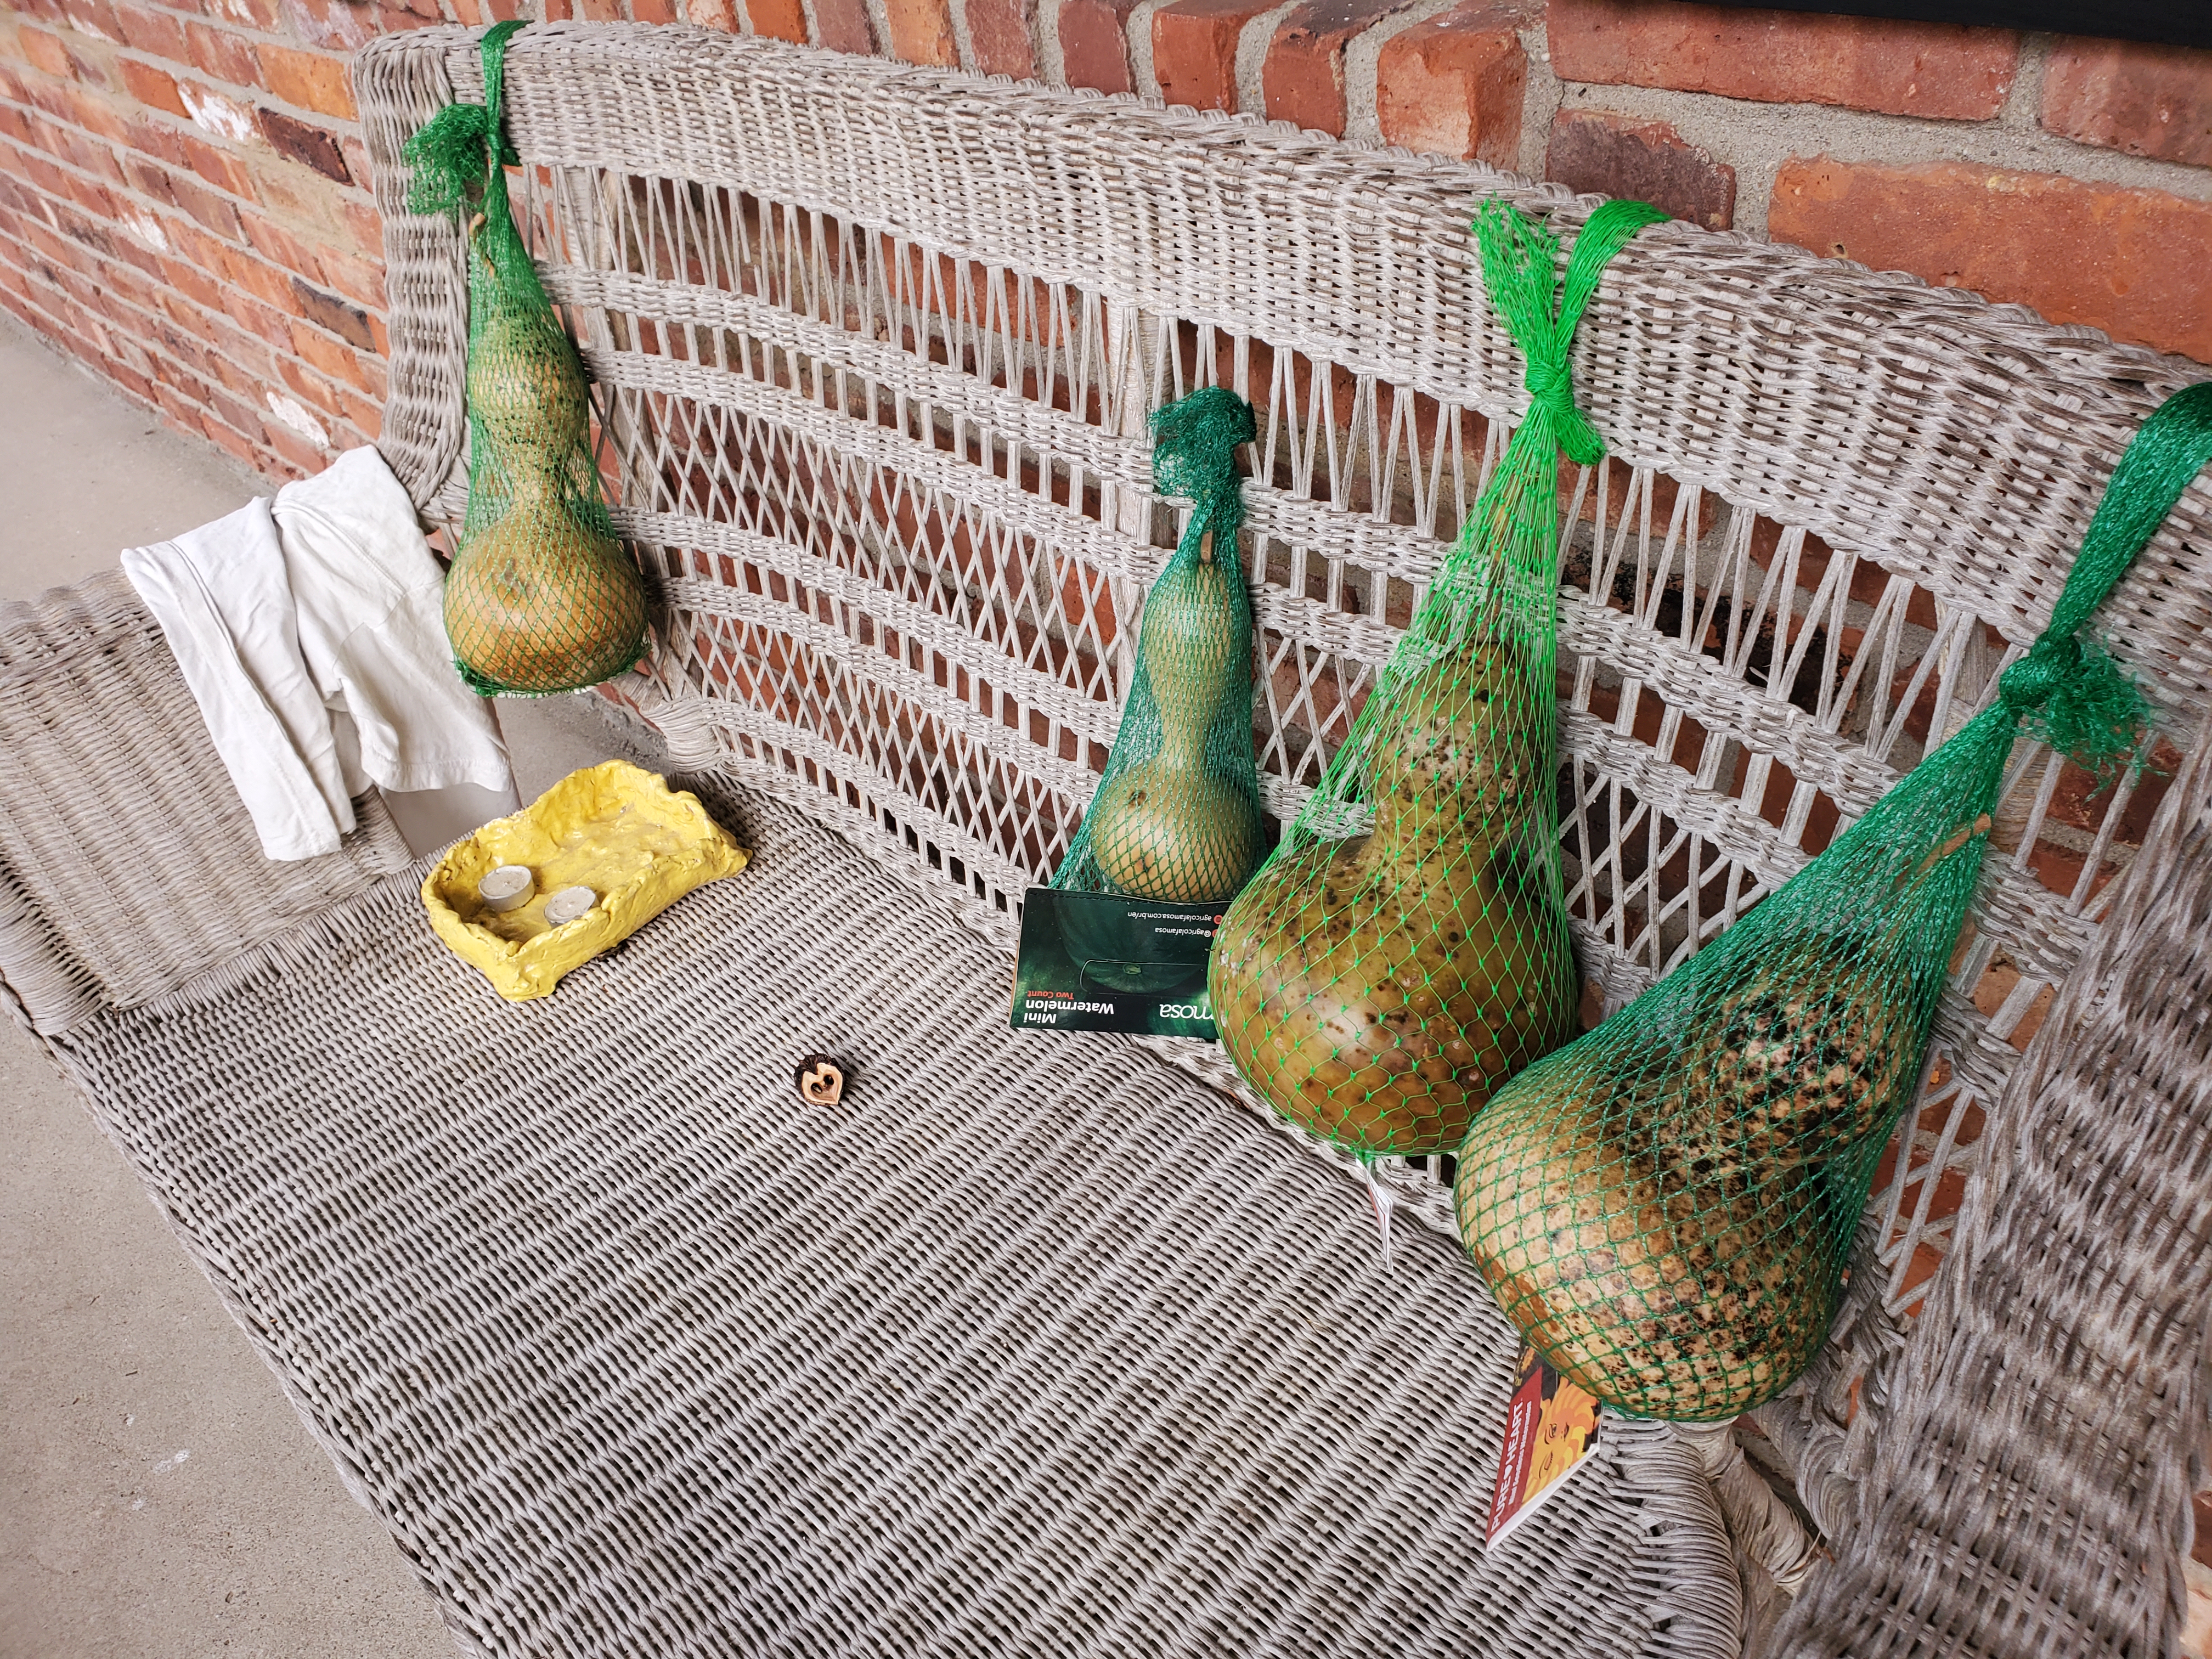 A row of gourds drying on the front porch